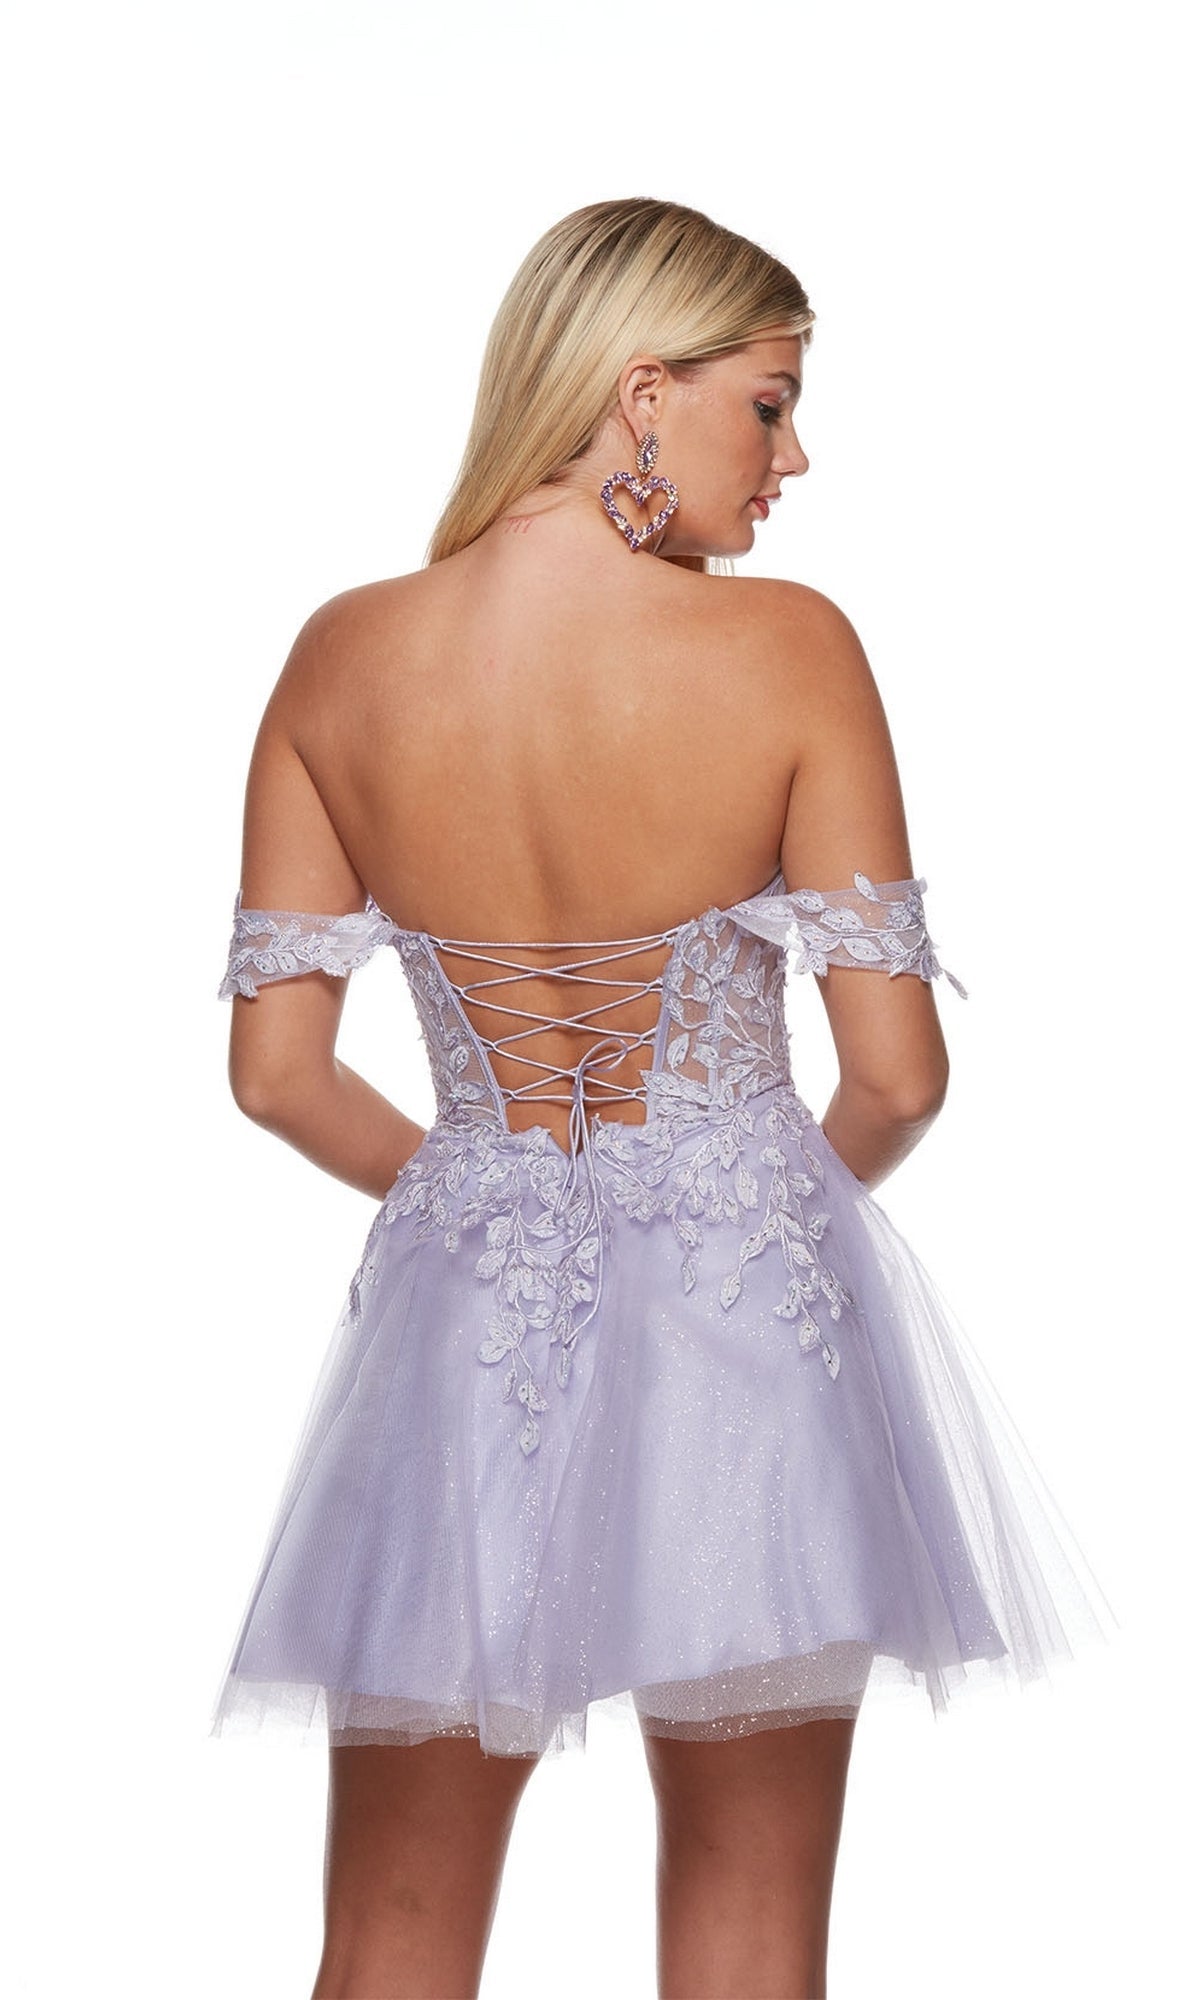  Short Dress By Alyce For Homecoming 3159